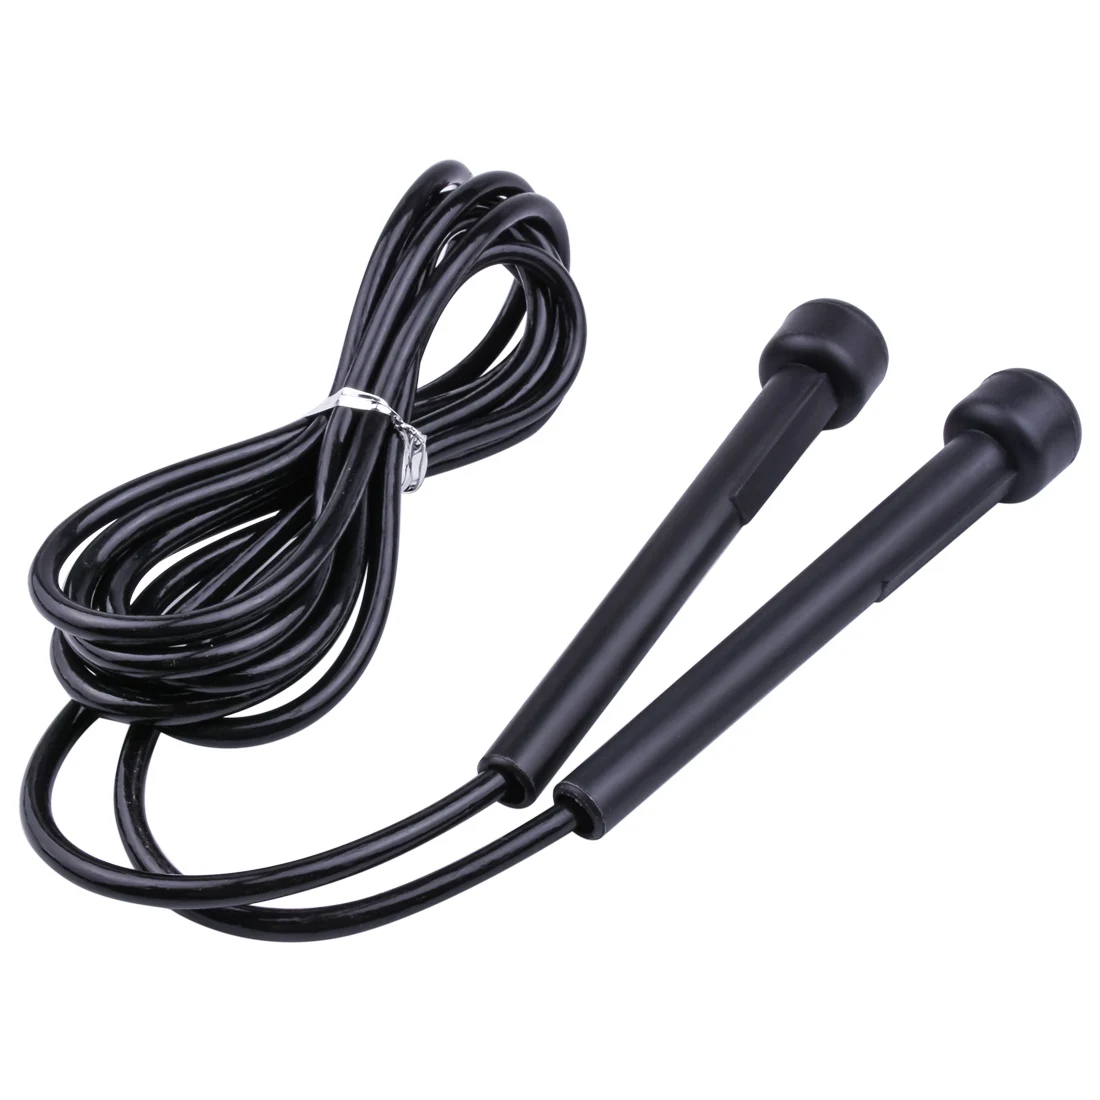 RDX Skipping Rope Adjustable PVC Jump Speed MMA Boxing Lose Gym Weight Gymnastics Fitness Jumping Metal Cable Workout Exercise Training